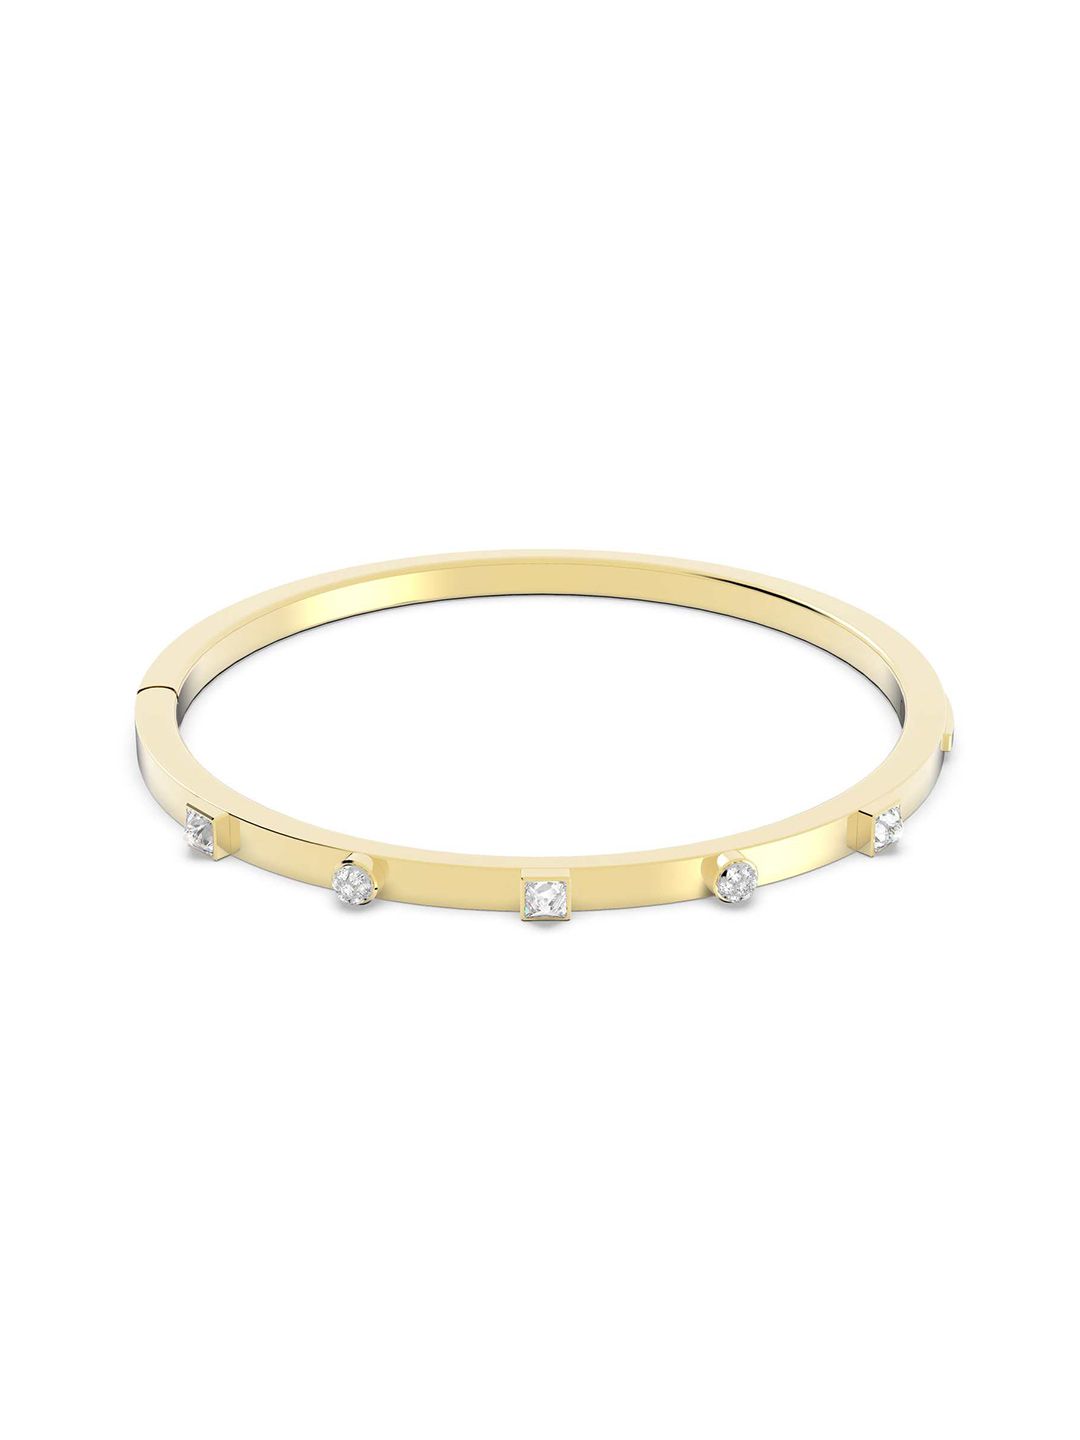 SWAROVSKI Women Gold-Toned & Silver-Toned Crystals Gold-Plated Bangle-Style Bracelet Price in India